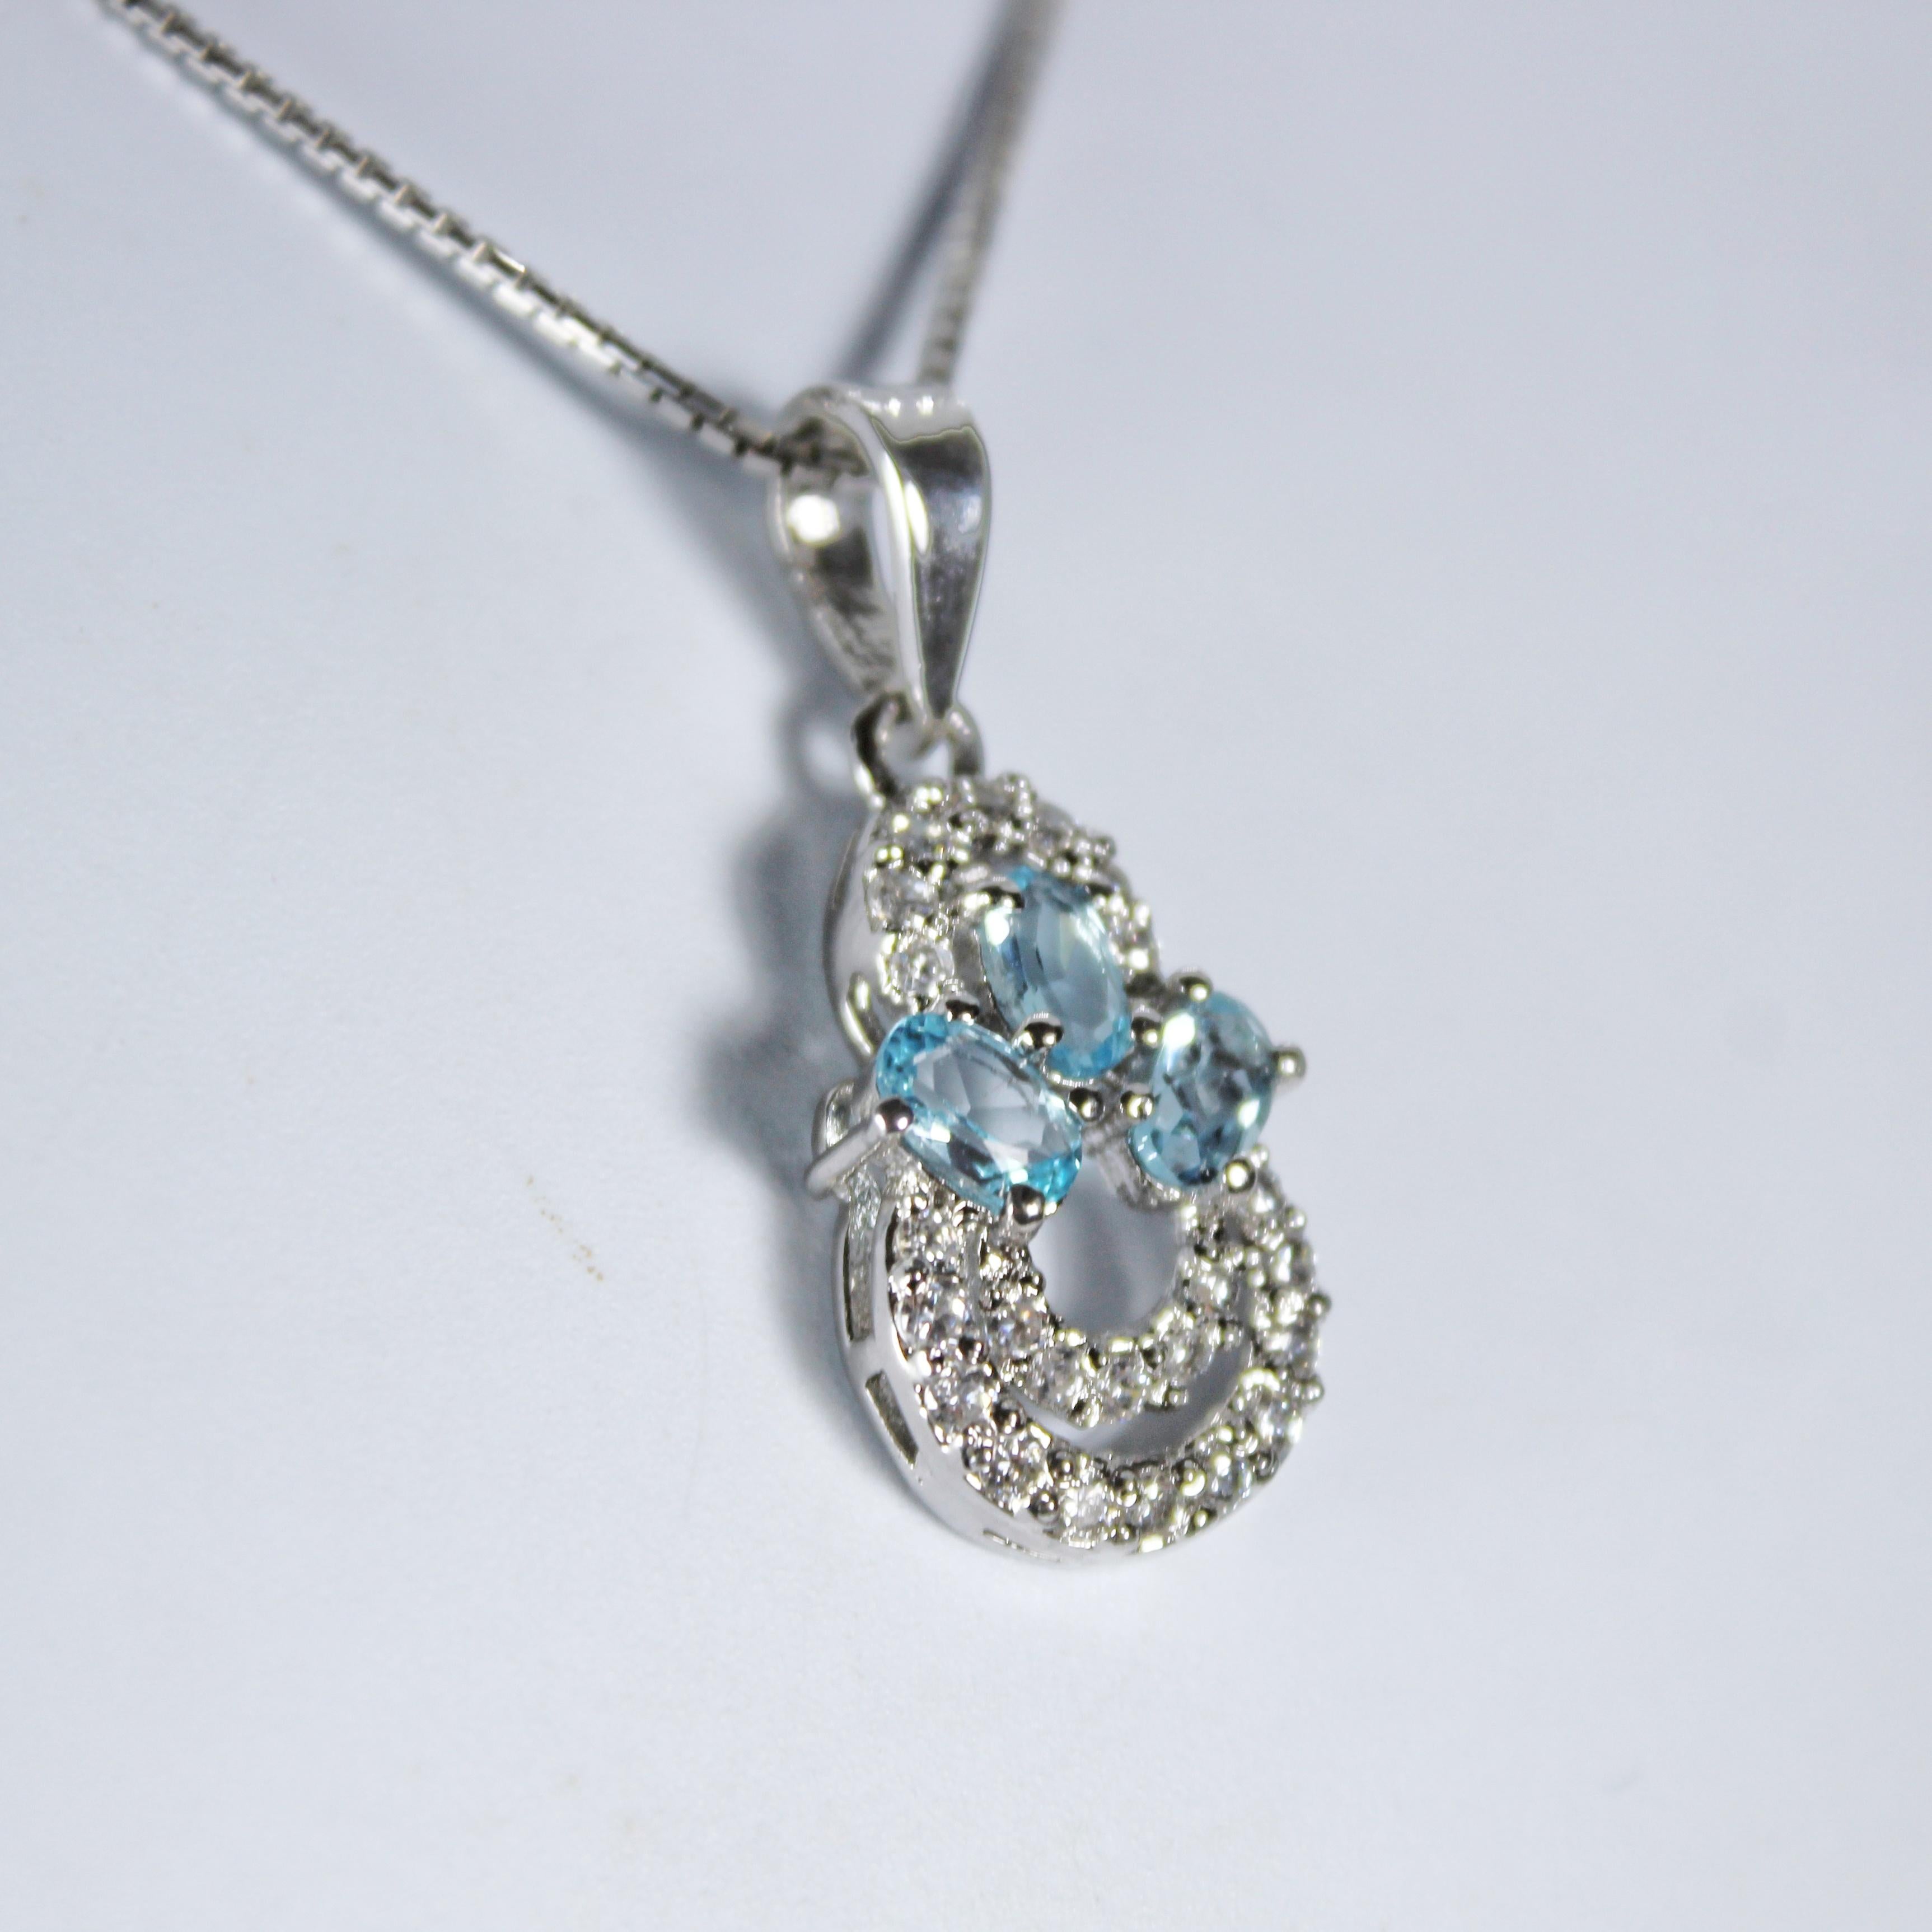 Product Details:

Metal of pendant - Sterling Silver
Diamonds - synthetic
Pendant size (without bail) - 17 x 10 mm
Pendant gross Weight - 2.19 Grams
Gemstones - Aquamarine
Total stone weight - 0.50 Carat
Stone shape - Oval
Stone size - 5 x 3